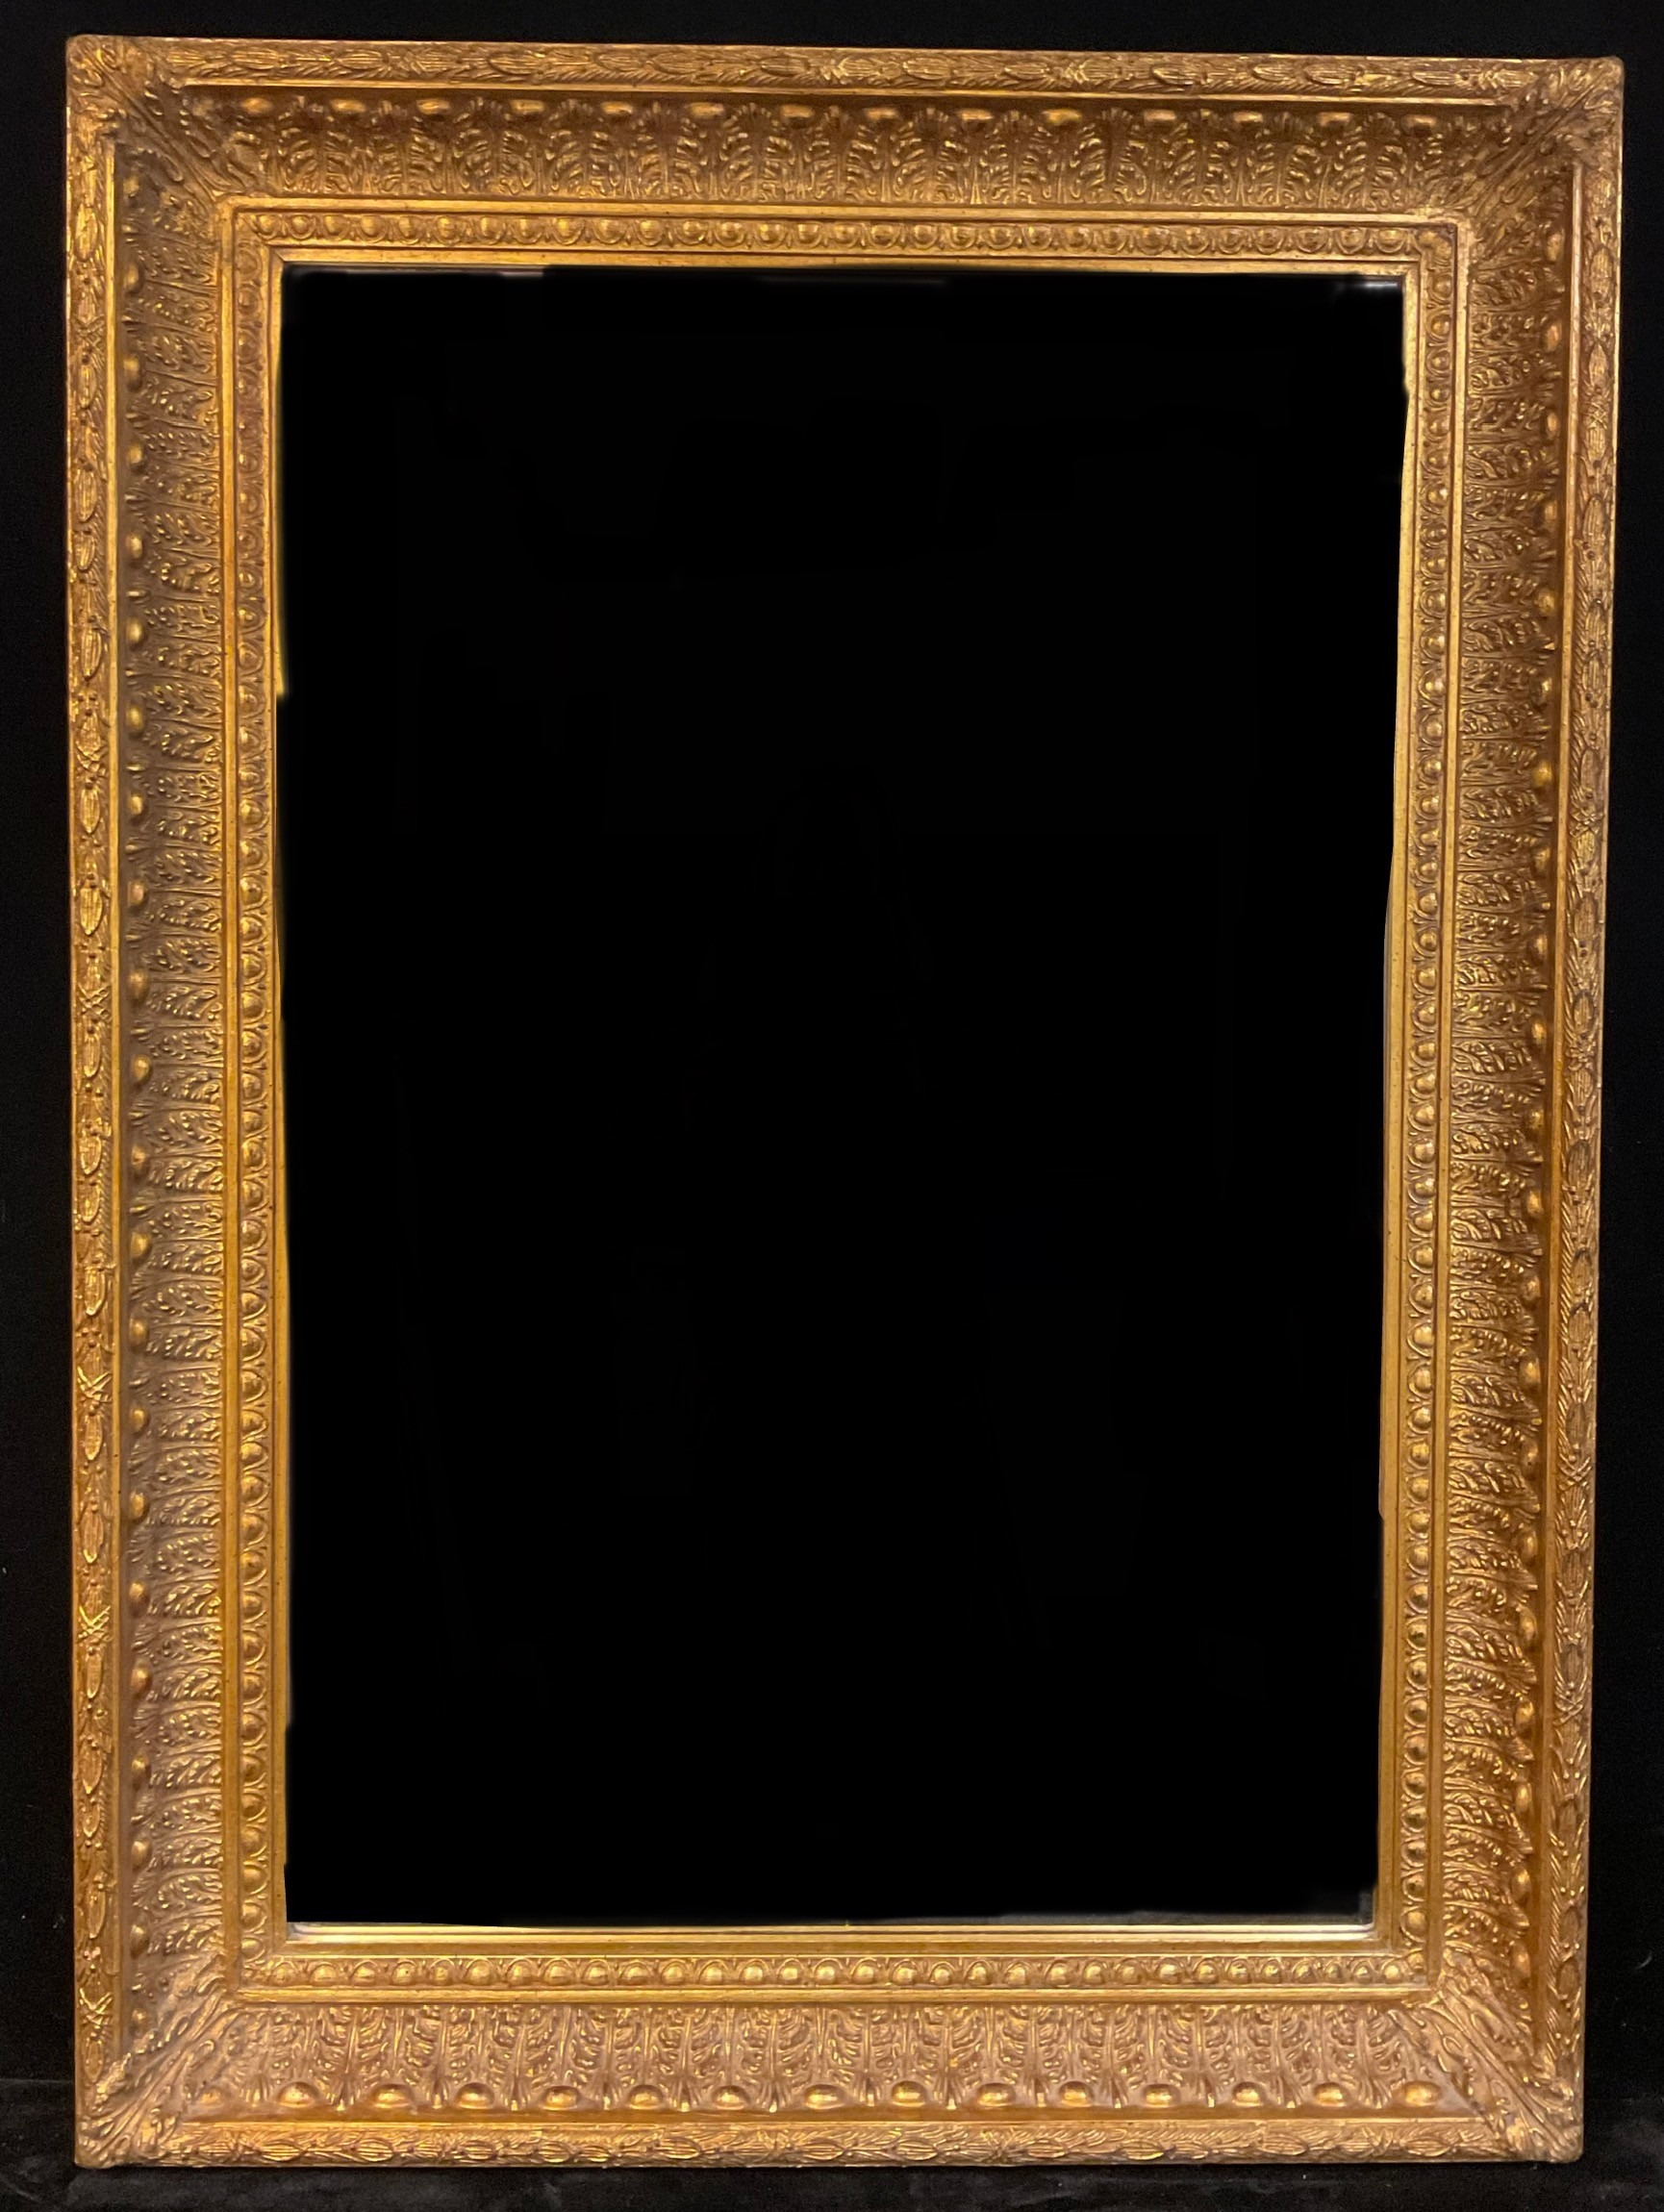 A large 19th century style gilt framed mirror or looking glass, bevelled plate, 110cm x 80cm